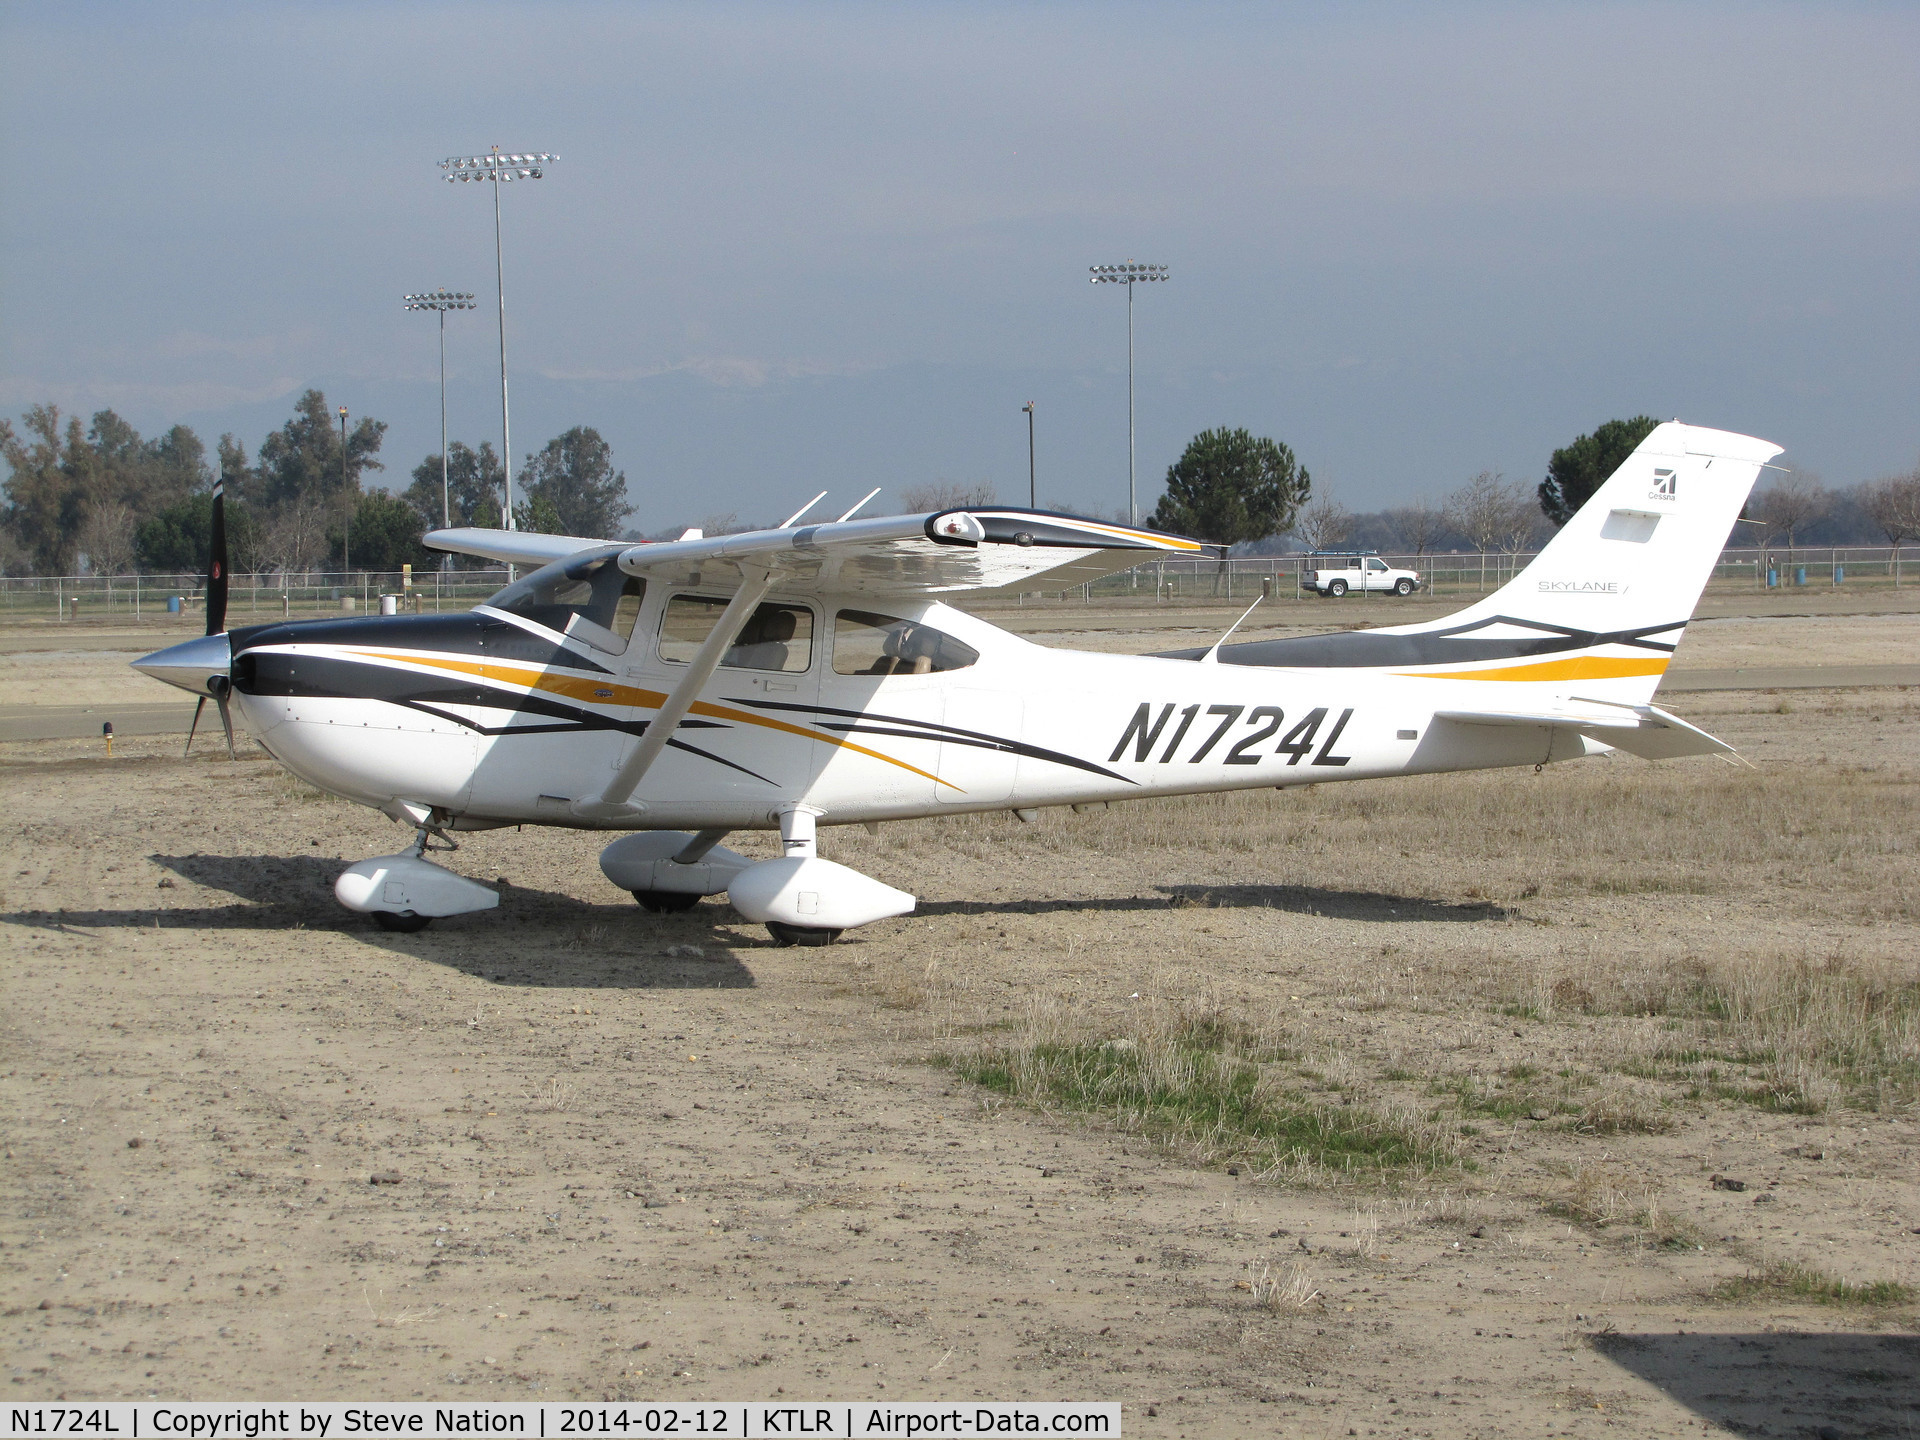 N1724L, 2007 Cessna 182T Skylane C/N 18282018, privately-owned Cessna 182T @ Mefford Field (Tulare, CA) for 2014 International Ag Expo